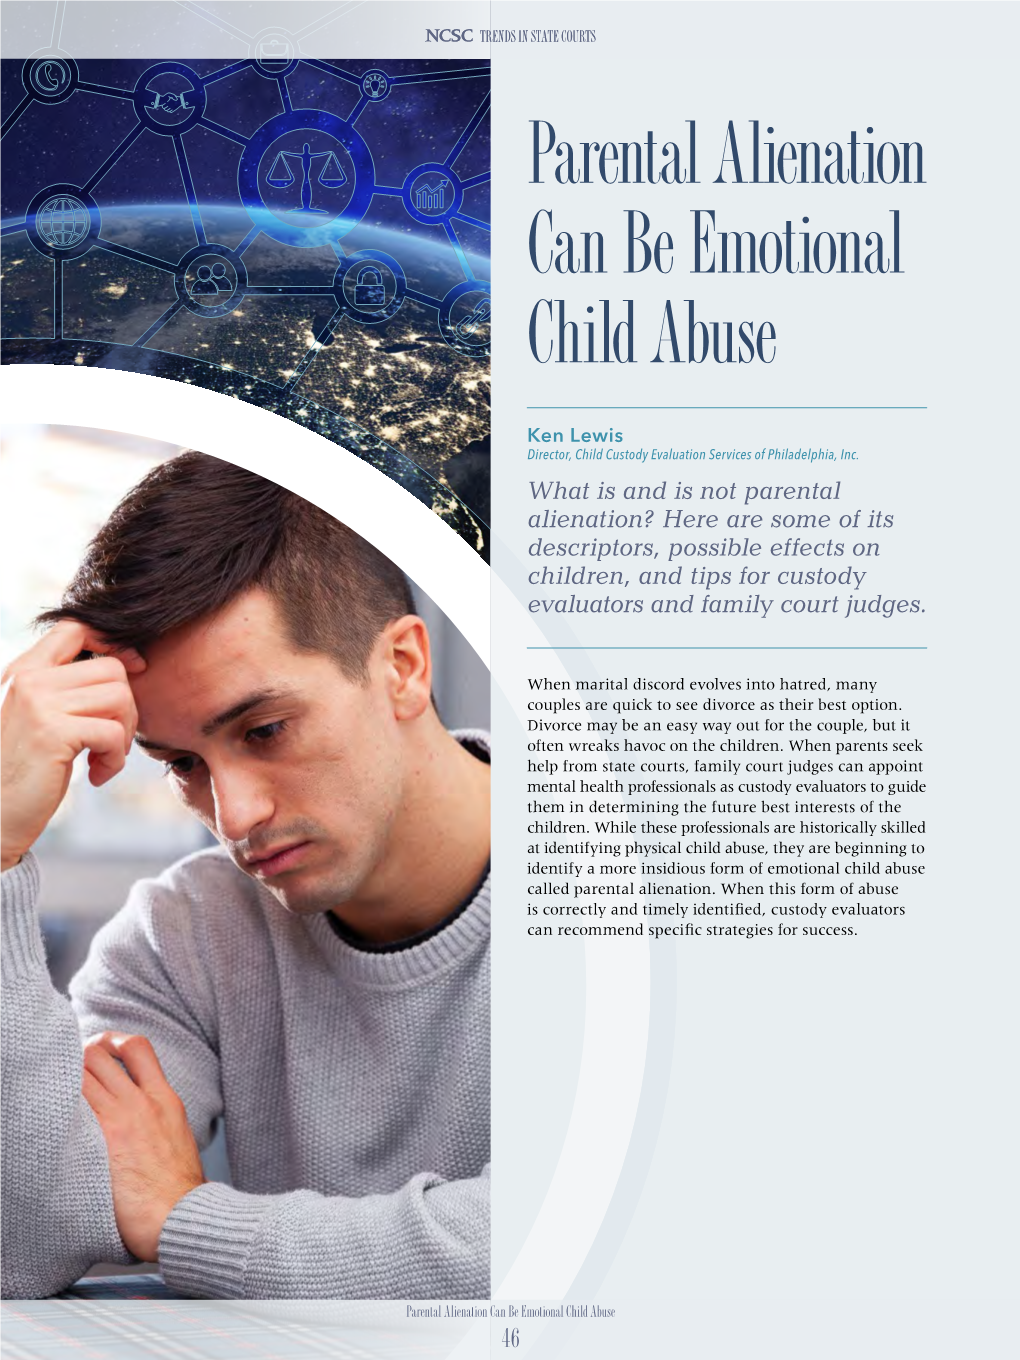 Parental Alienation Can Be Emotional Child Abuse